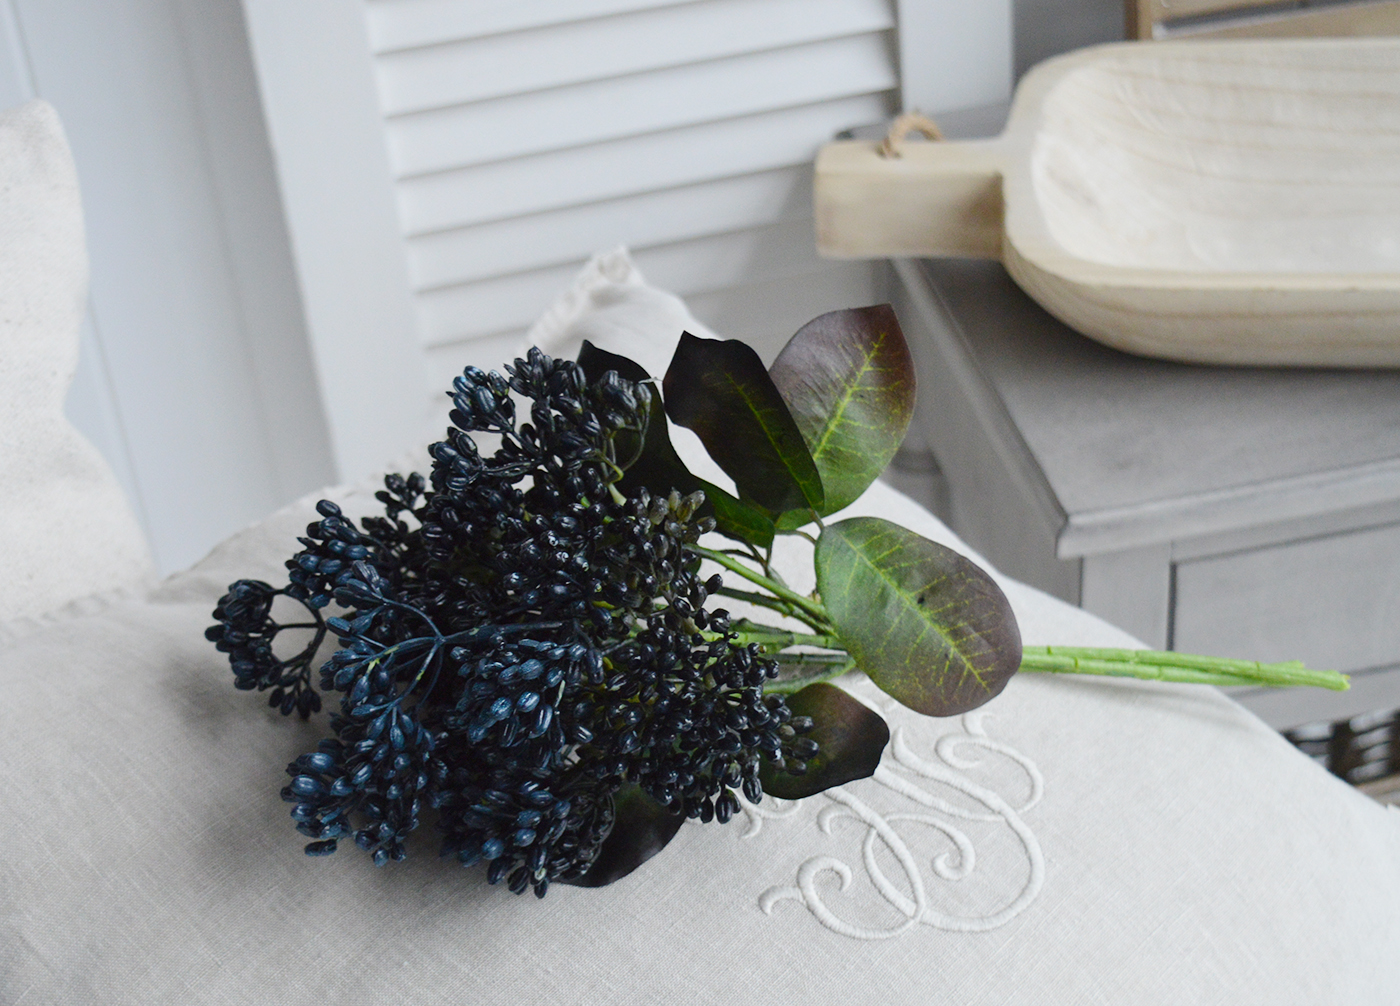 White Furniture and accessories for the home. Artificial greenery Devils Walking Stick. Blue Purplish berries on greenery. New England coastal and country interiors